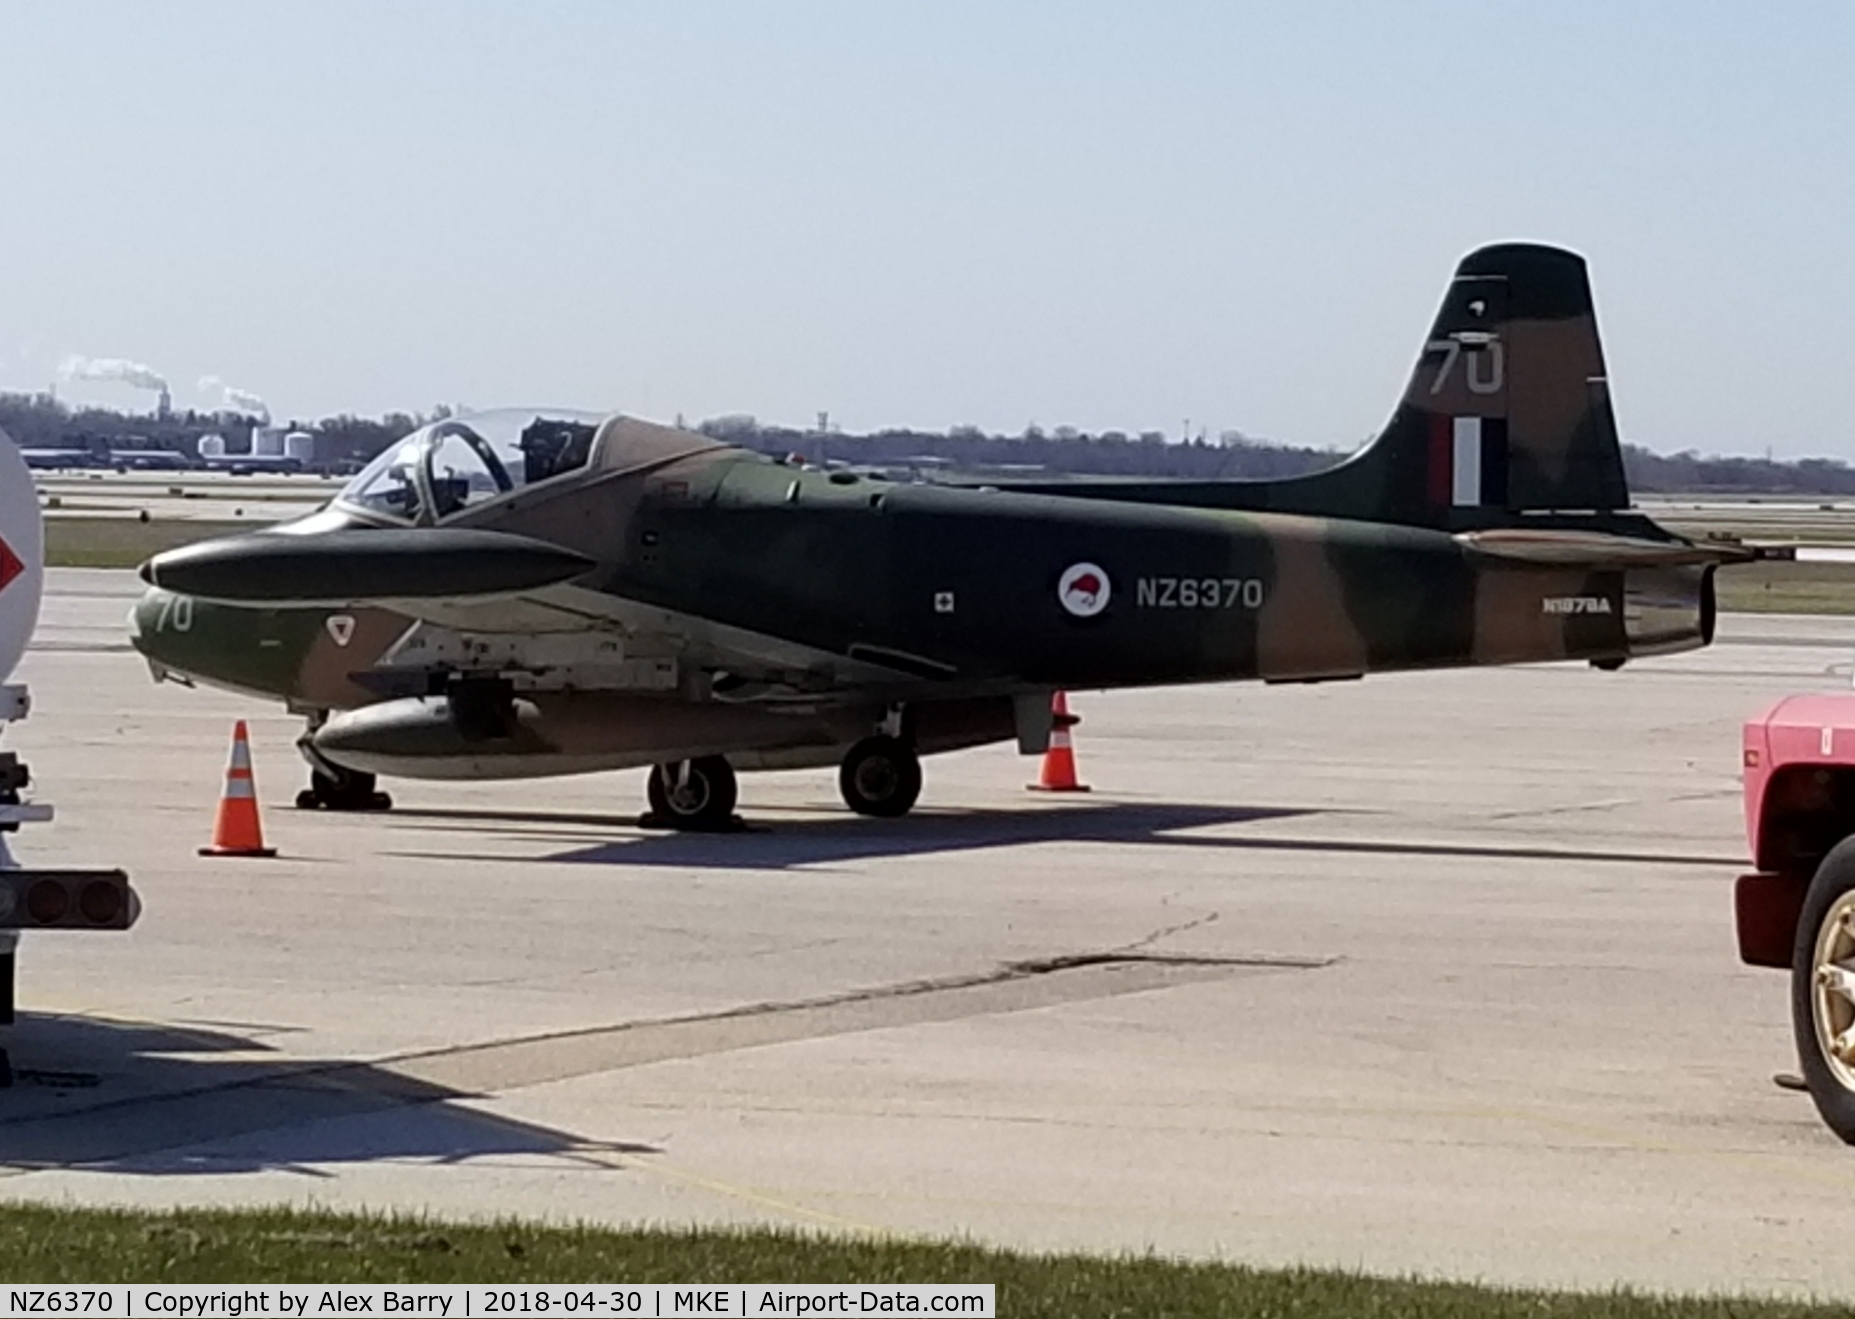 NZ6370, 1972 BAC 167 Strikemaster Mk.88 C/N EEP/JP/310, Sighted at MKE on the apron outside Signature Flight Support, 0930 on 30/4/2018.